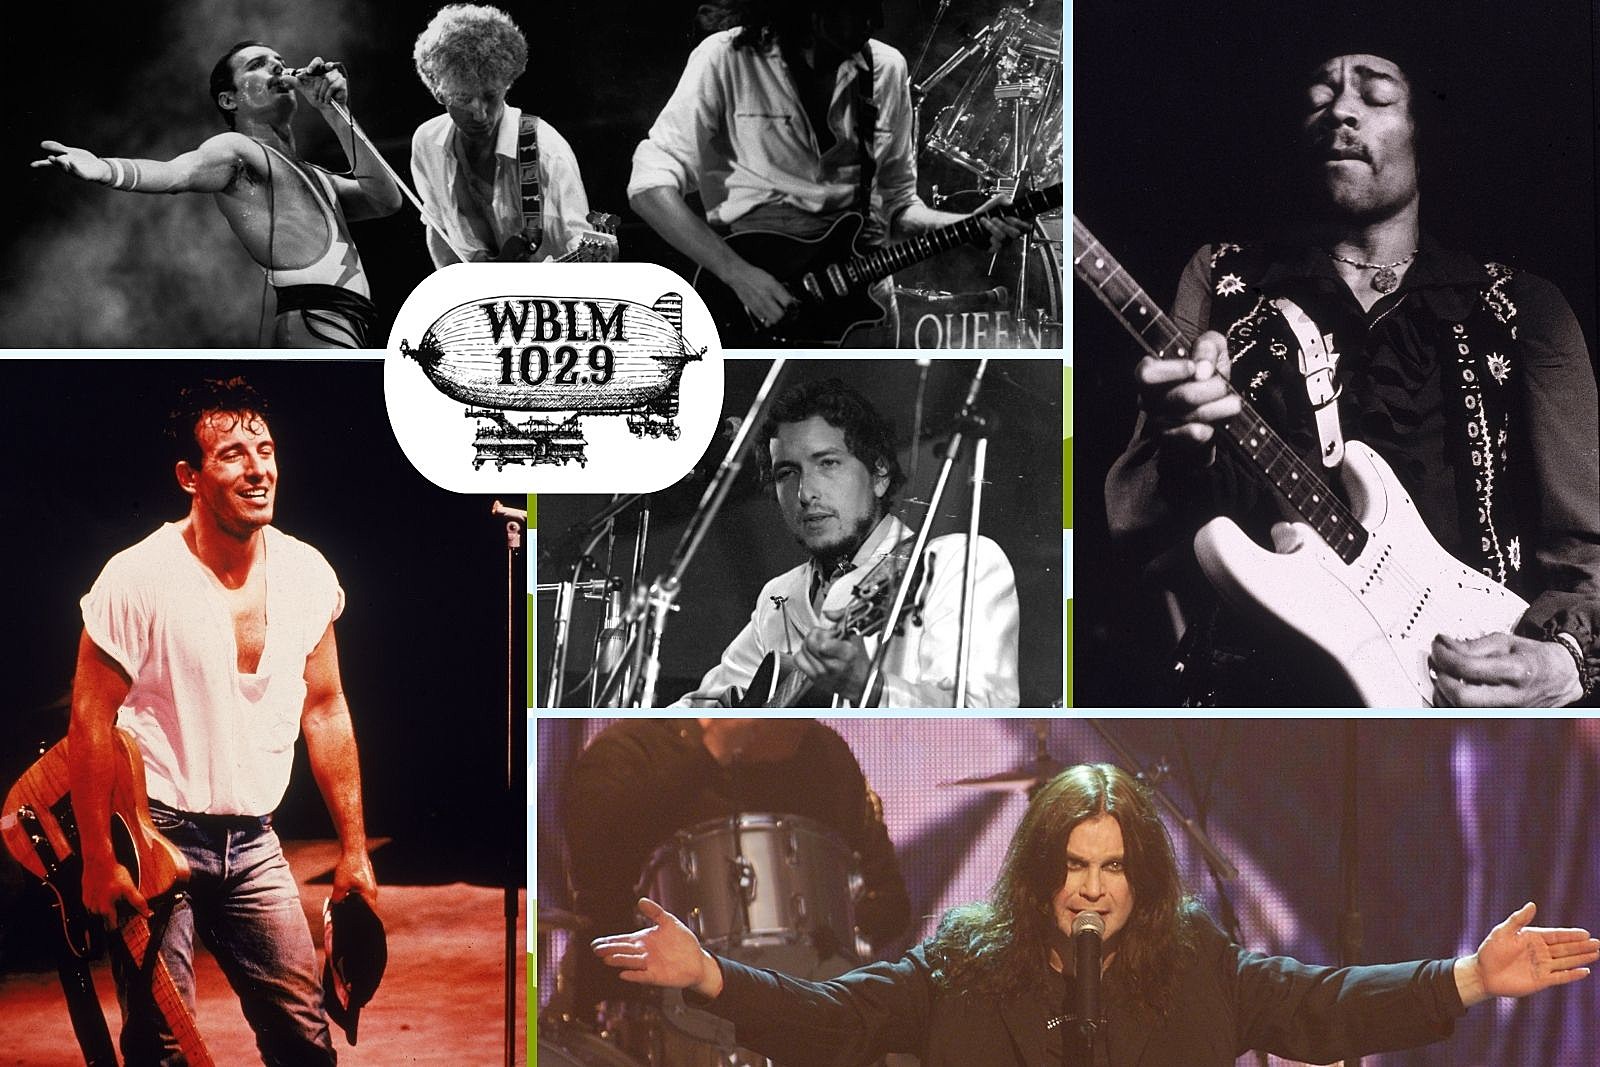 Celebrate WBLM's 50th With All-Time Classic Rock Songs 1029 - 501